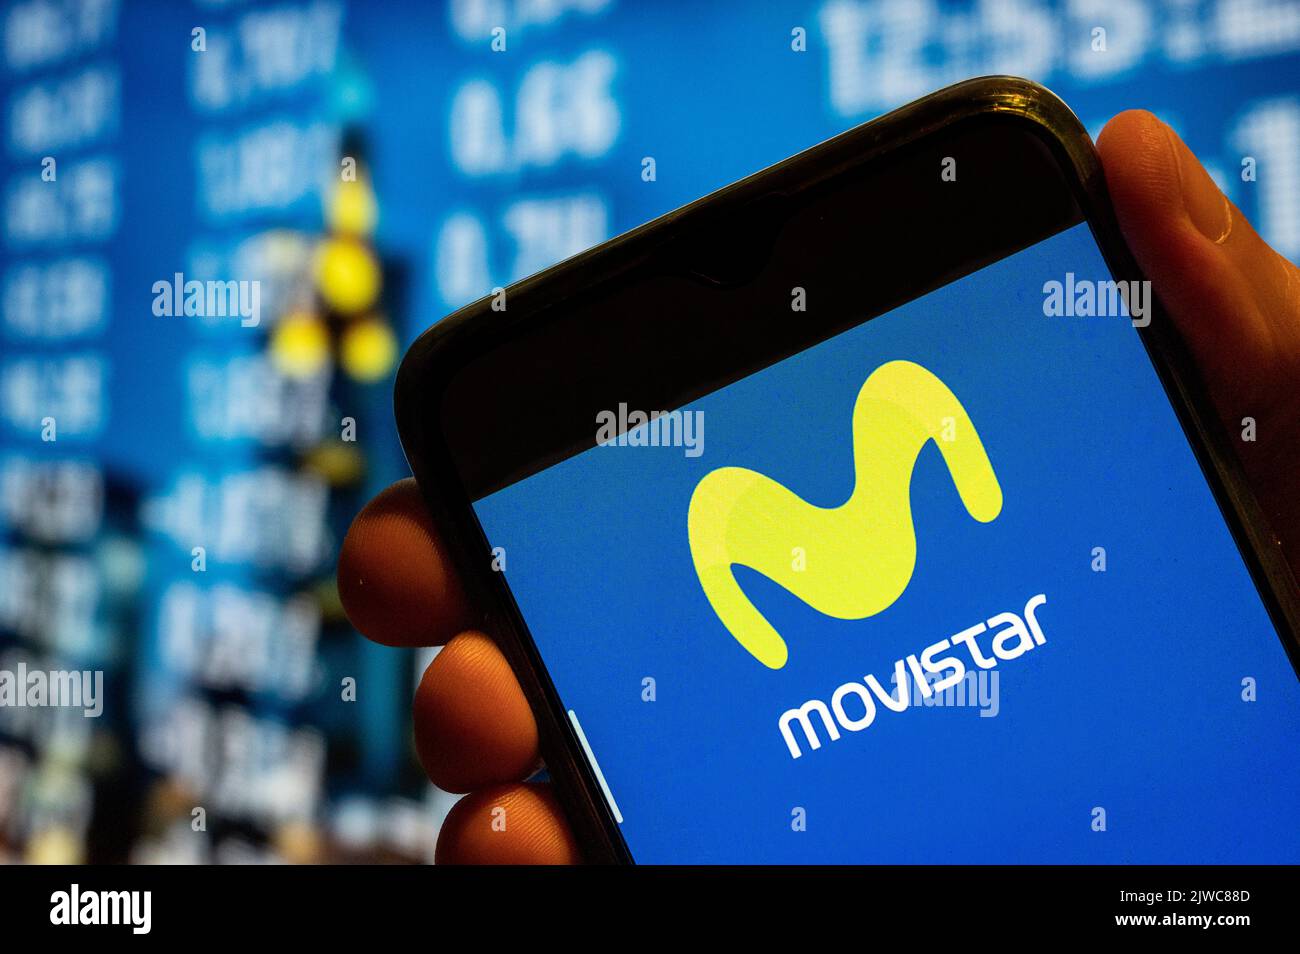 In this photo illustration, the Spanish telecommunications brand owned by Telefonica and largest mobile phone operator, Movistar, logo is displayed on a smartphone screen. Stock Photo